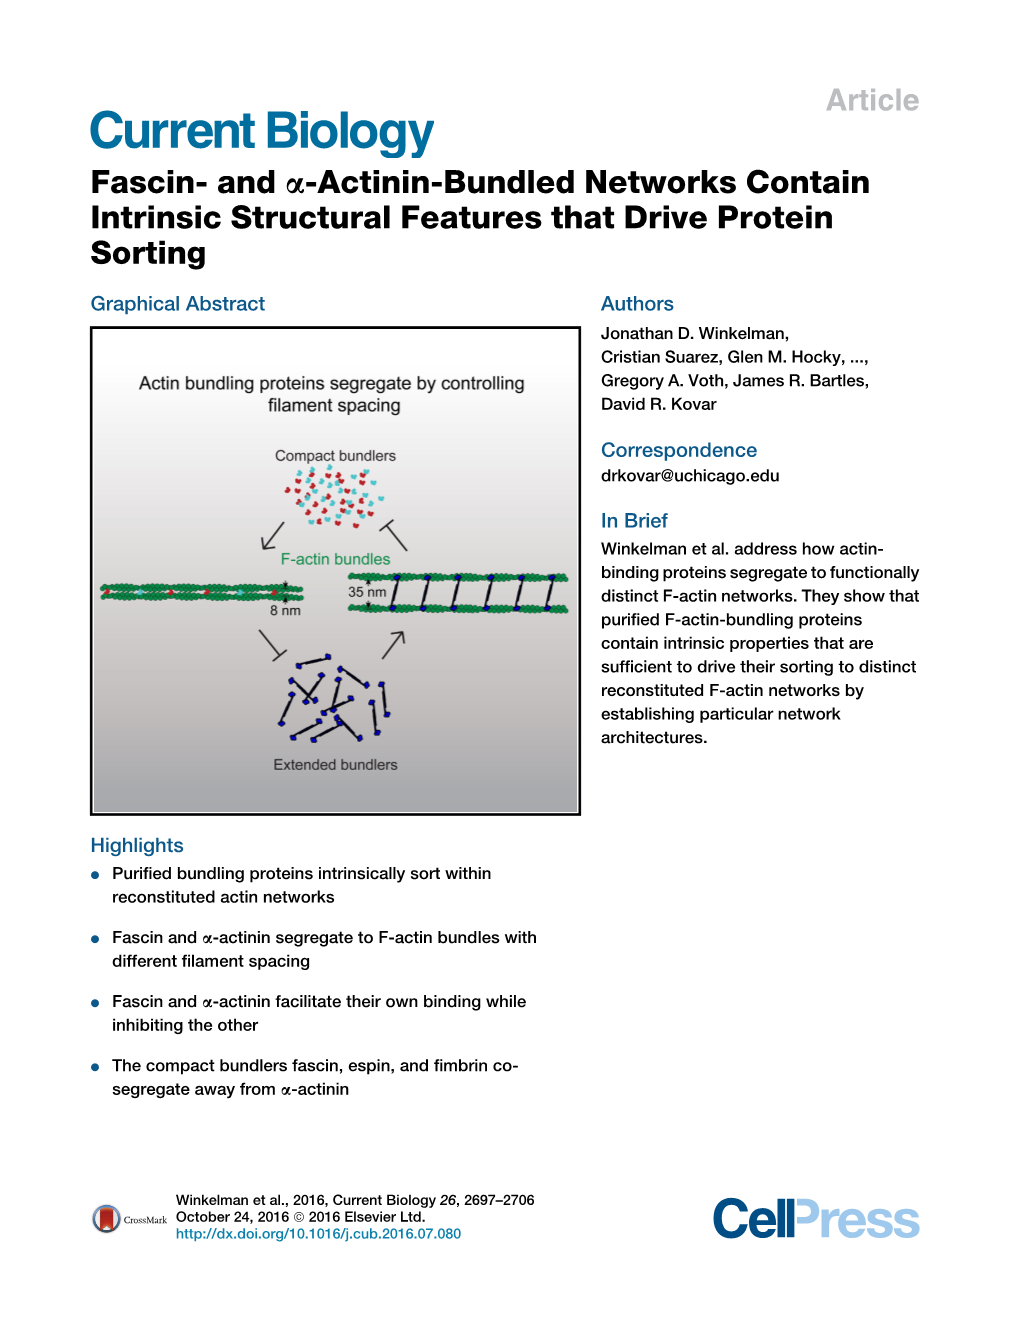 Fascin- and A-Actinin-Bundled Networks Contain Intrinsic Structural Features That Drive Protein Sorting